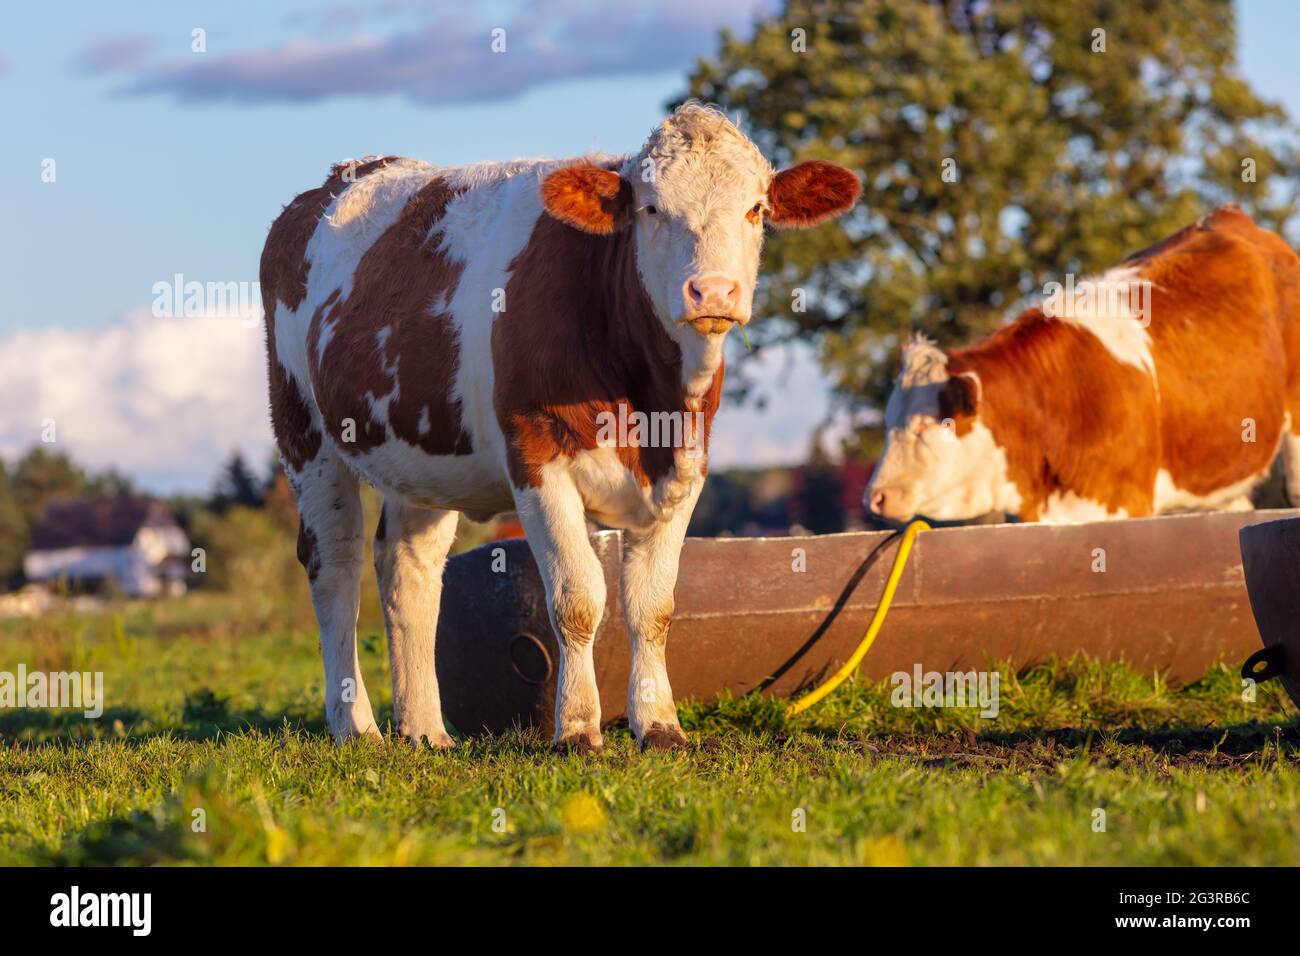 Calf rearing: young calves / heifers / cow in the open air, cattle breeding, rearing, green nature Stock Photo